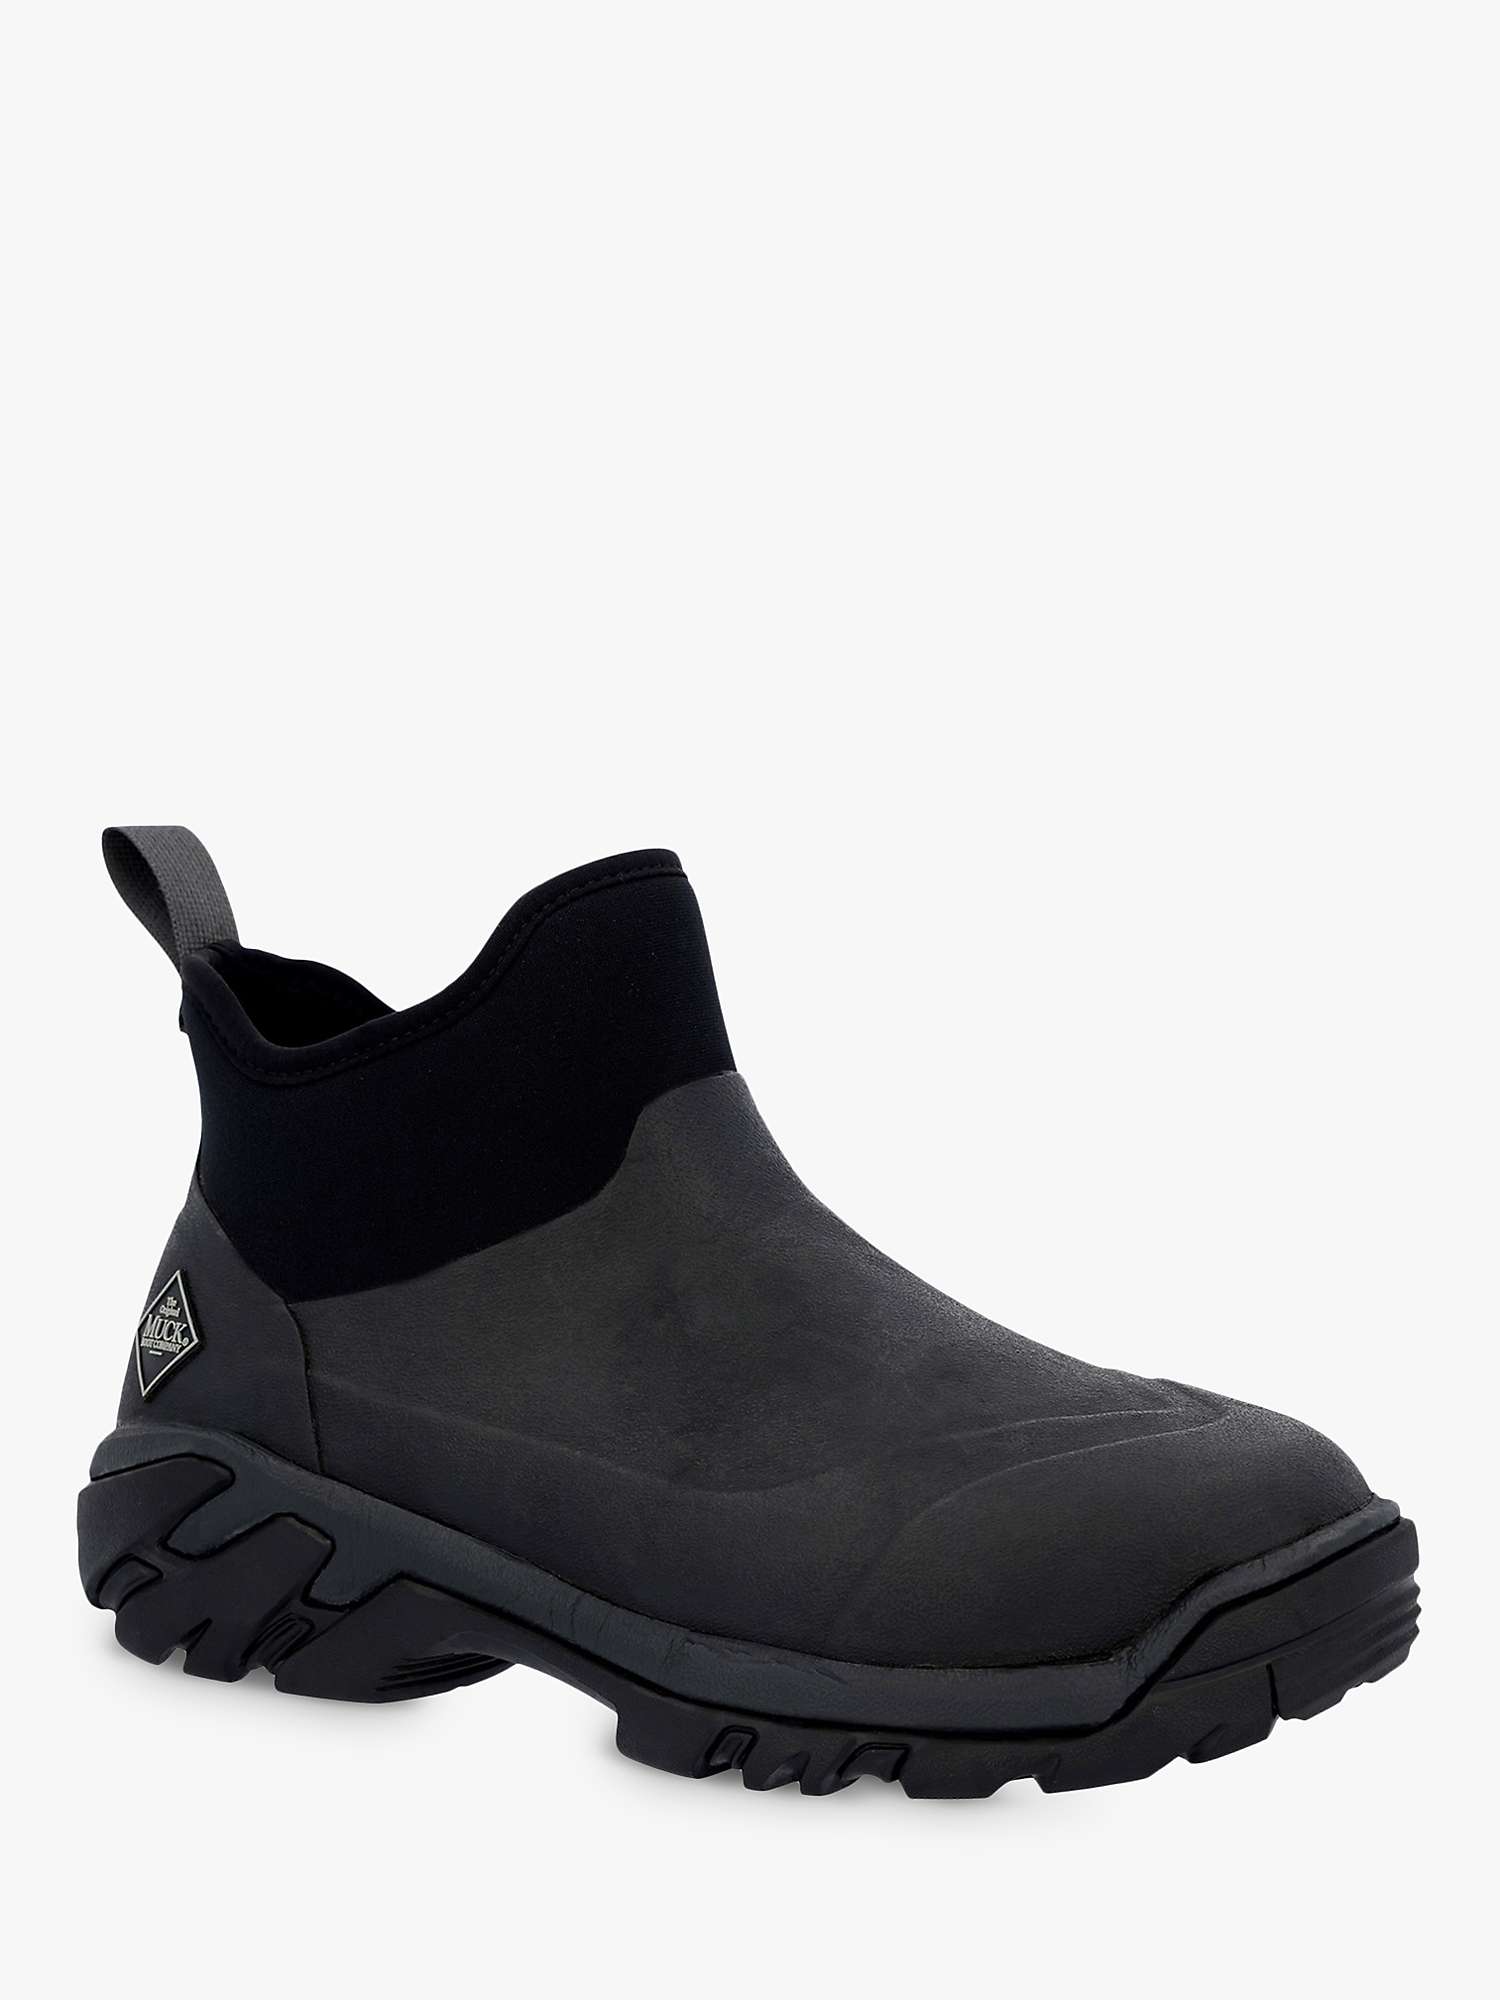 Buy Muck Woody Sport Rubber Boots Online at johnlewis.com